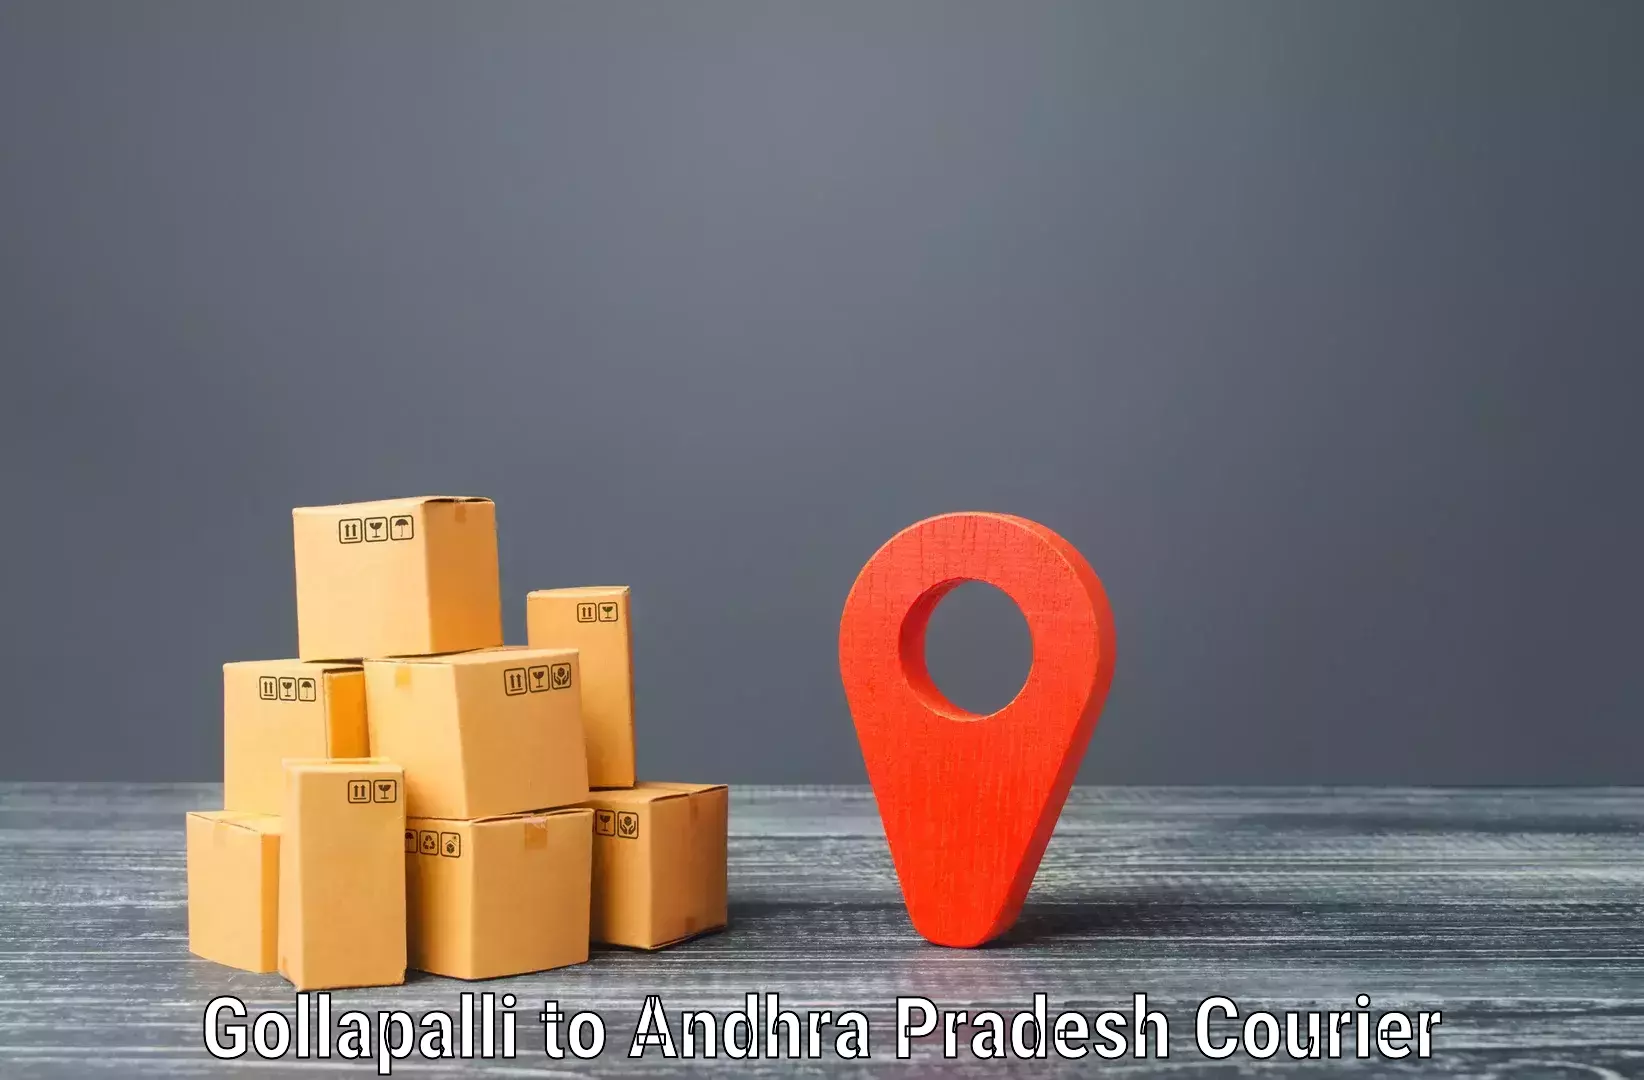 Reliable freight solutions Gollapalli to Mudigubba